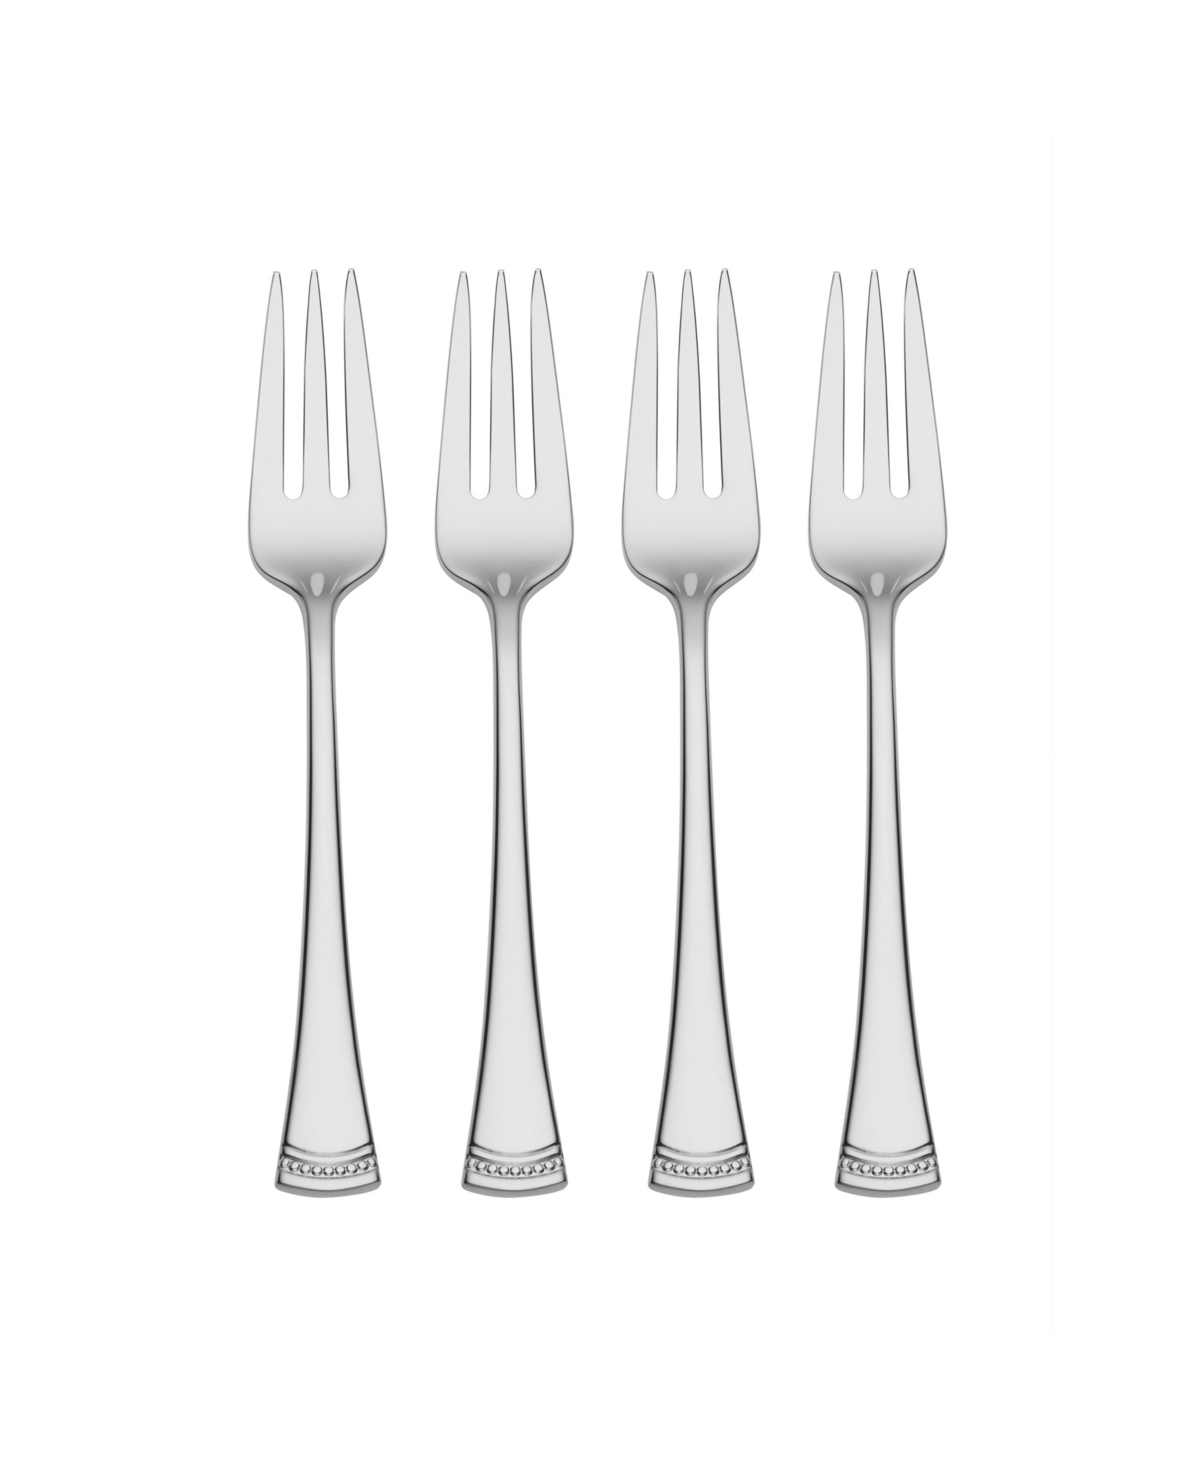 Lenox Portola Cocktail Forks, Set Of 4 In Metallic And Stainless